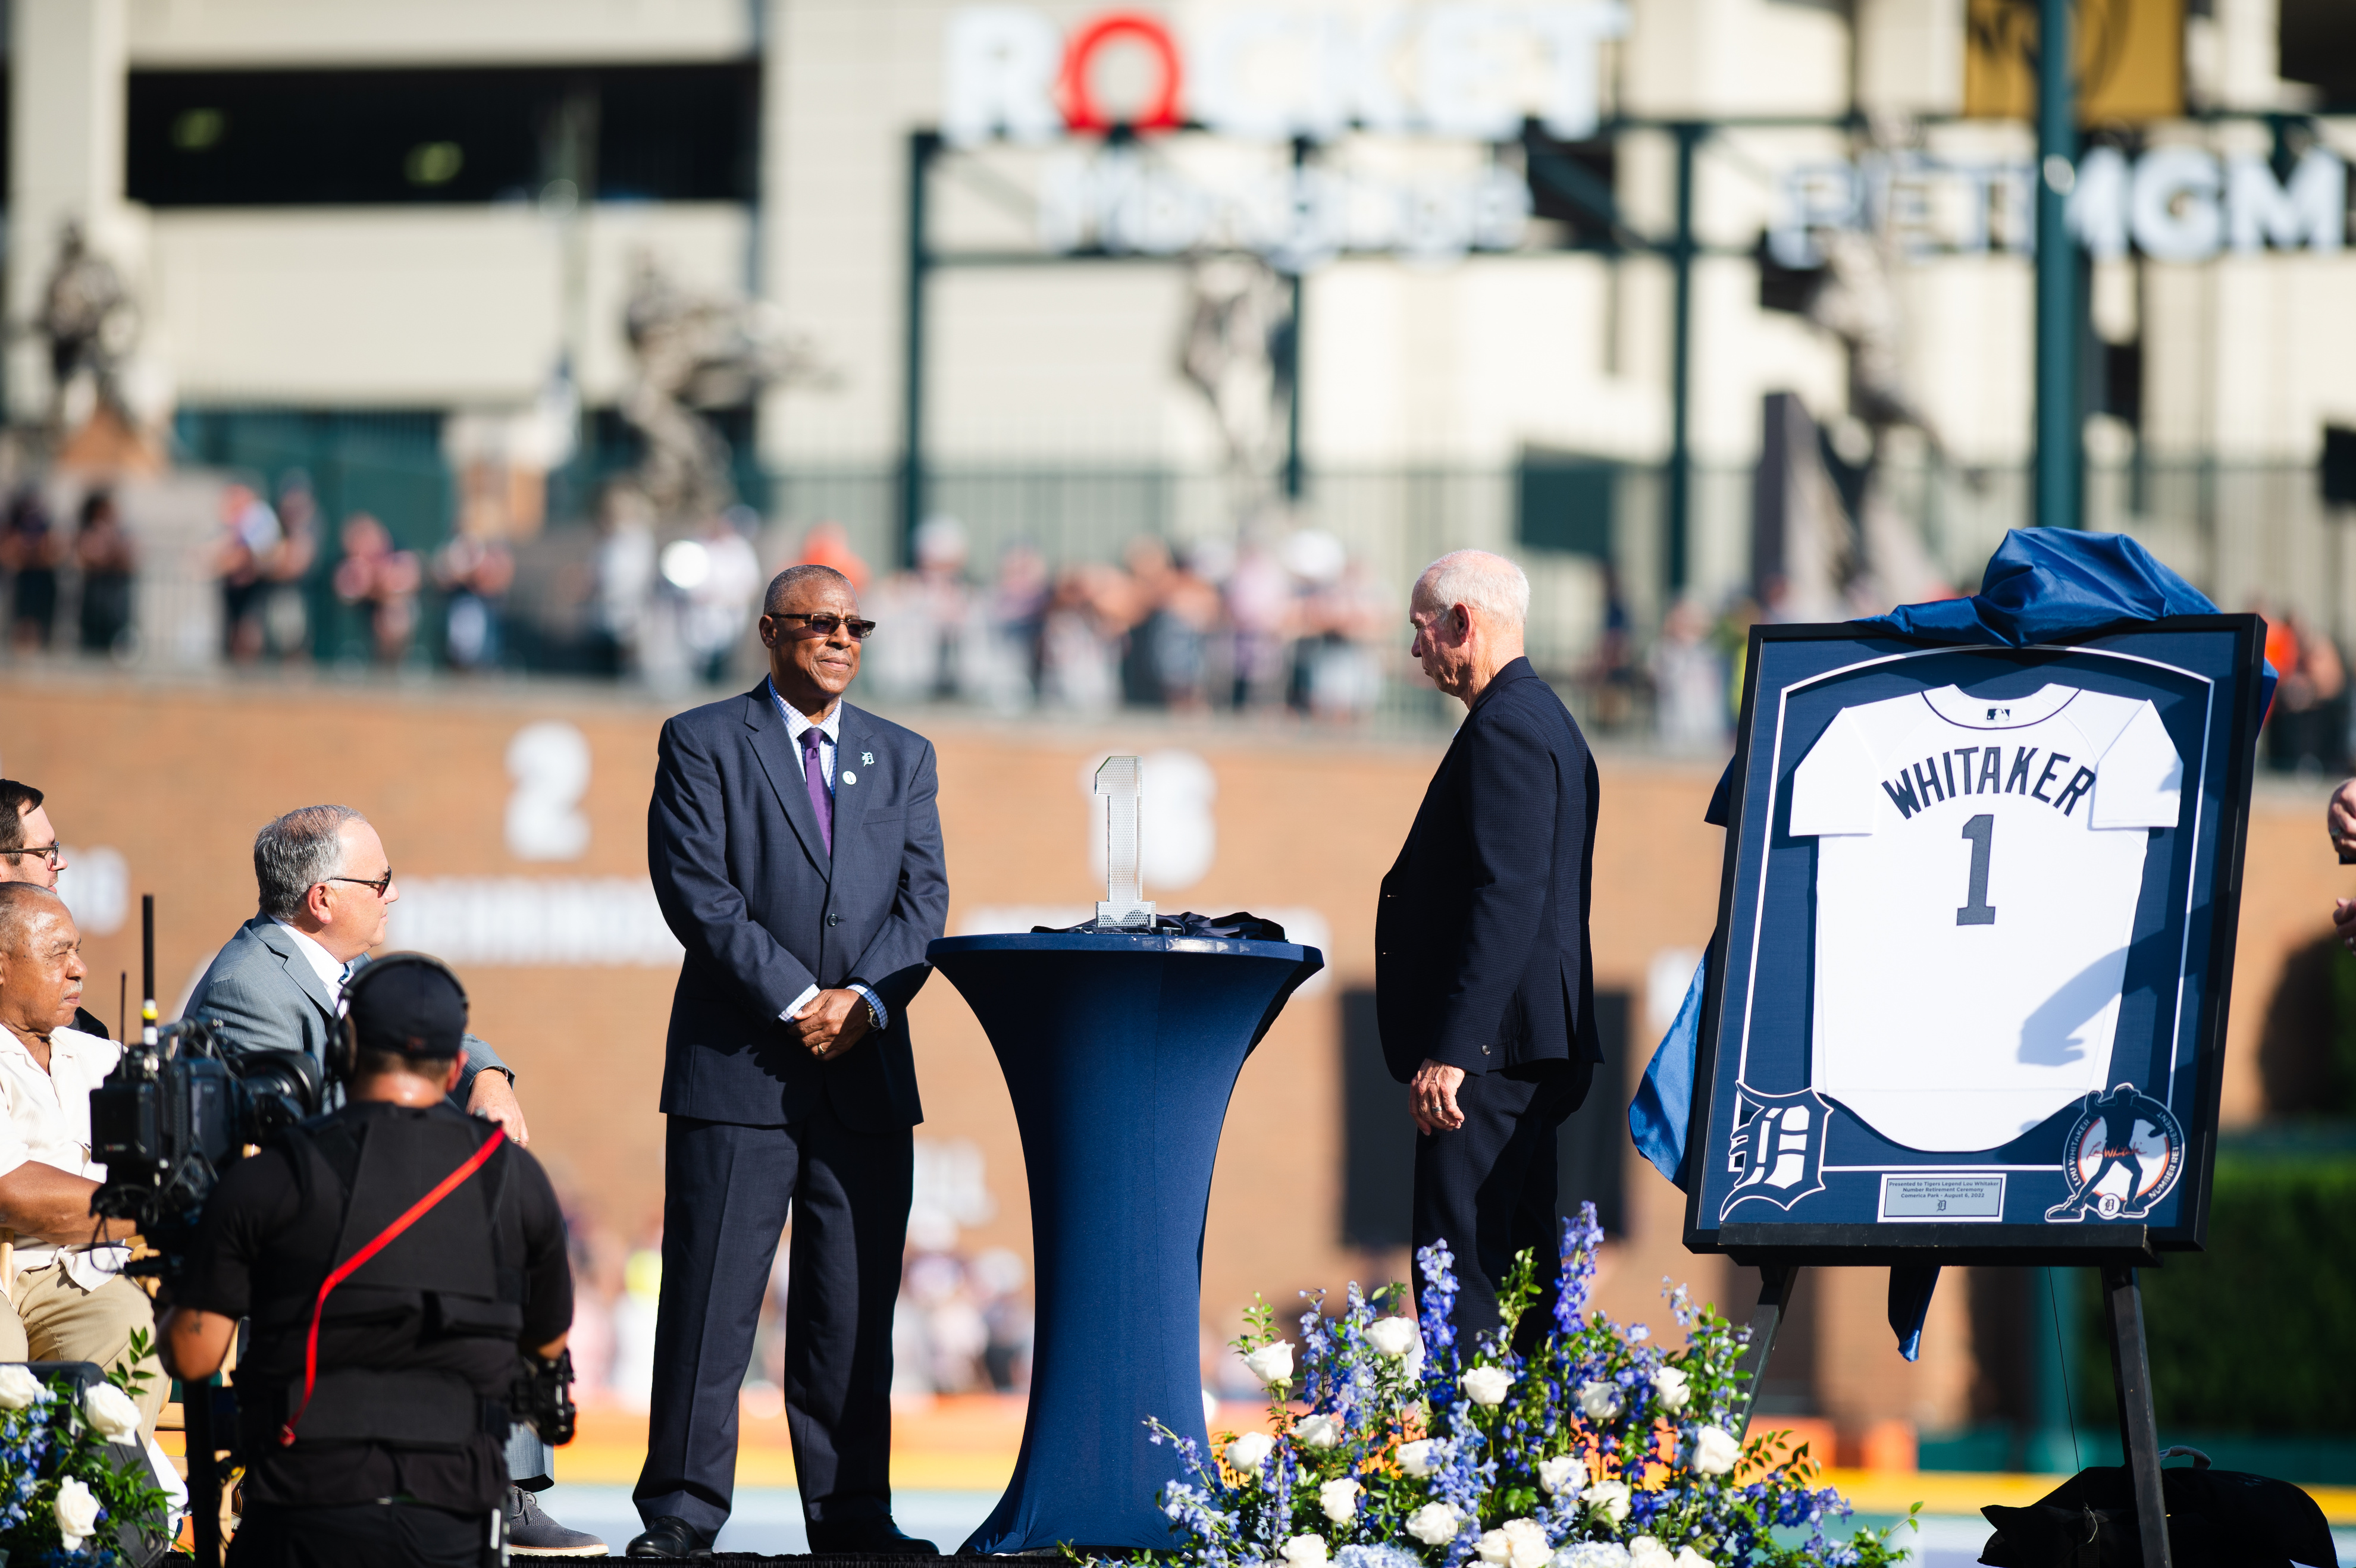 Lou Whitaker Ceremony Part 3 